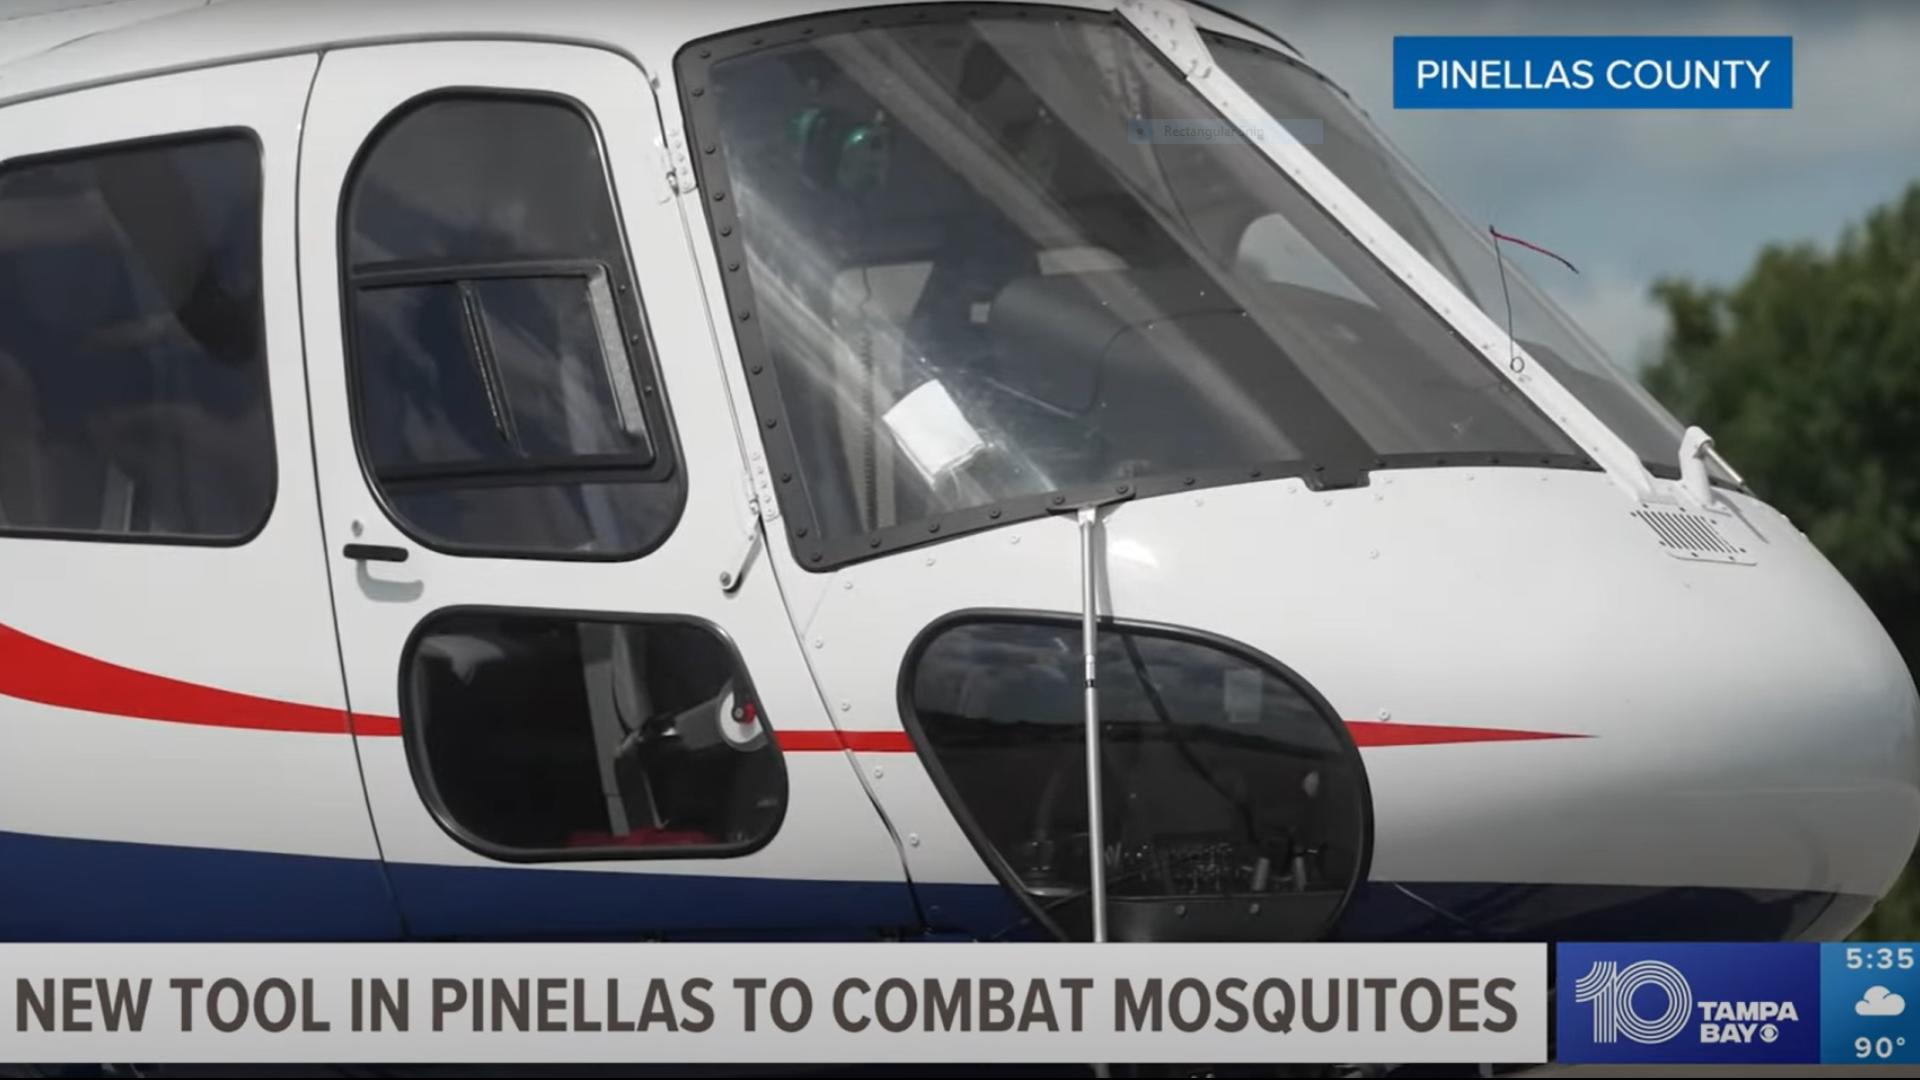 Larvacide is being sprayed across Pinellas County to combat the rise in mosquitos and dengue fever cases.